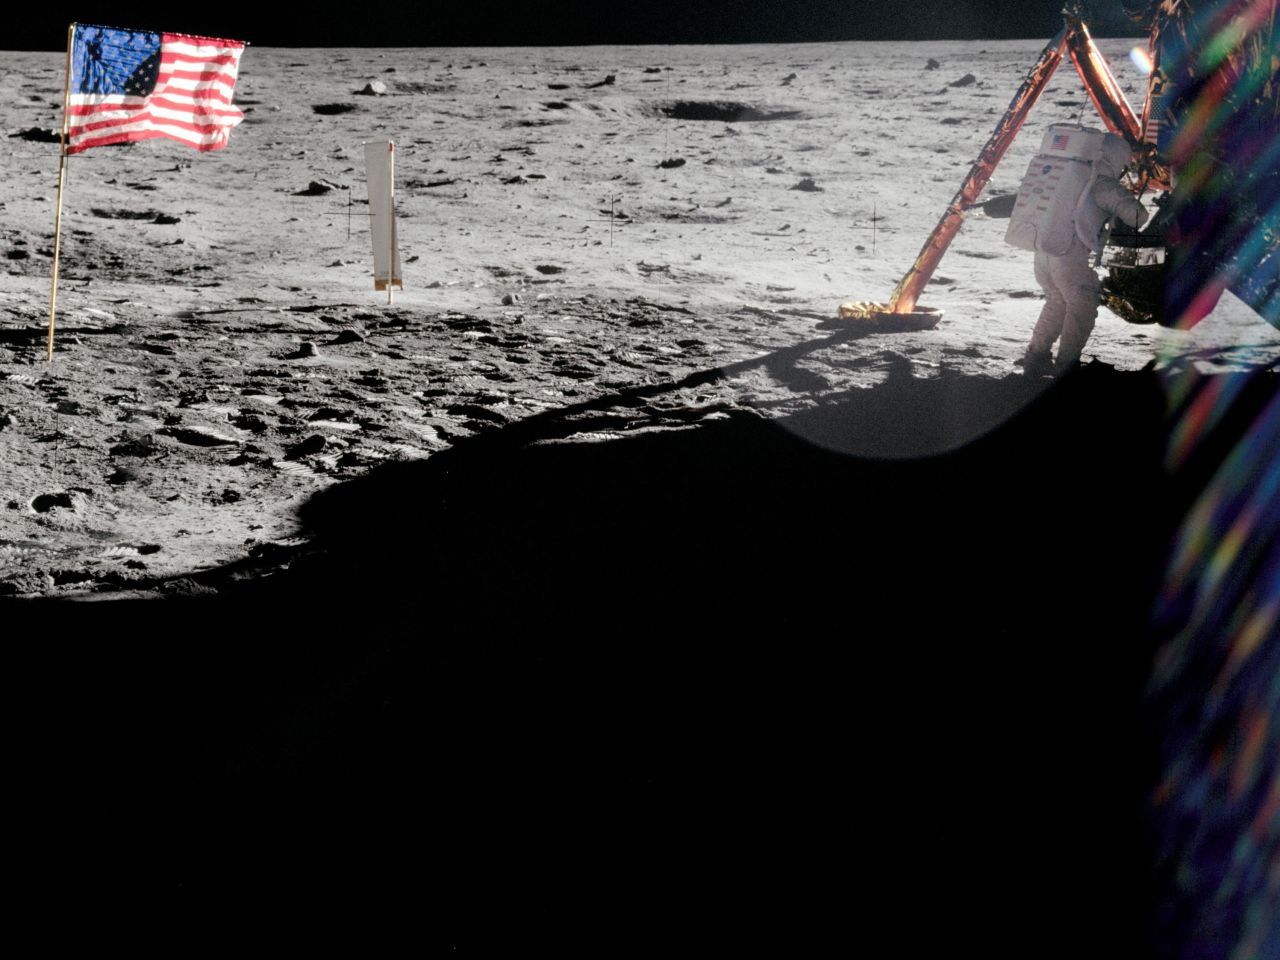 Armstrong took most of the photographs during his historic moonwalk, so you don't see many pictures of him -- this was before the age of the selfie. This rare shot from Aldrin shows Armstrong near the lunar module Eagle.